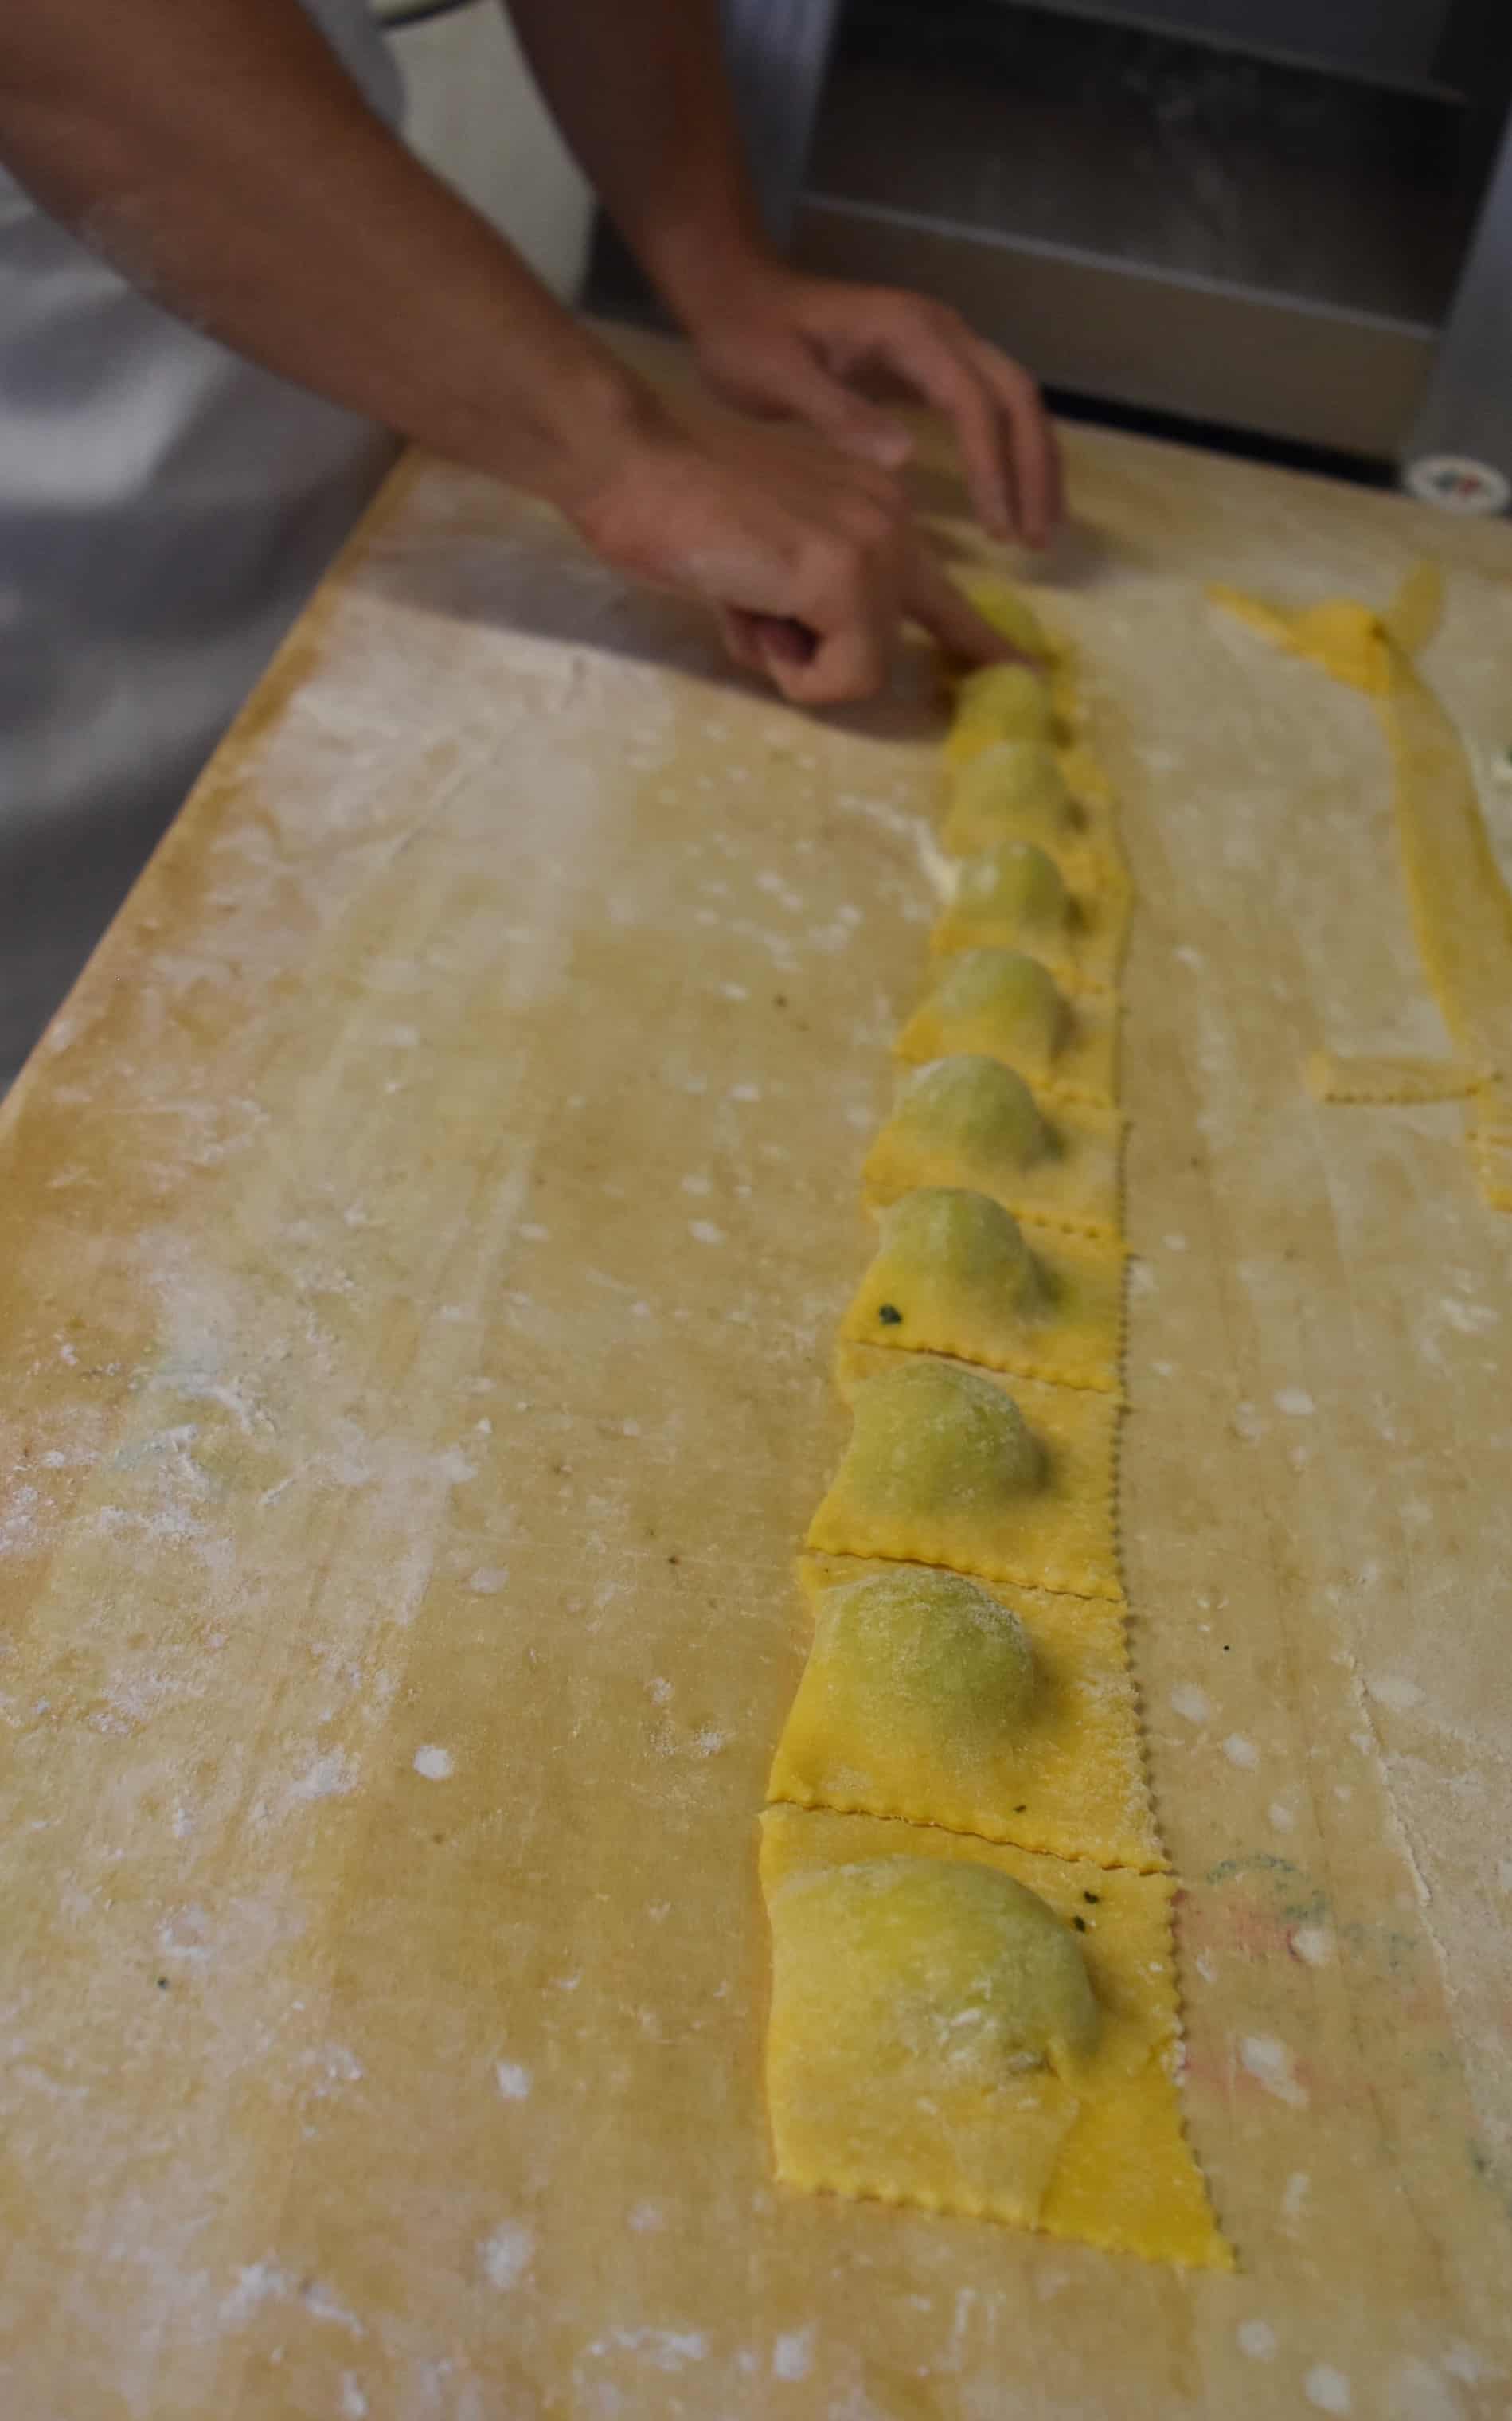 Emilia Romagna is famous for it's filled pasta